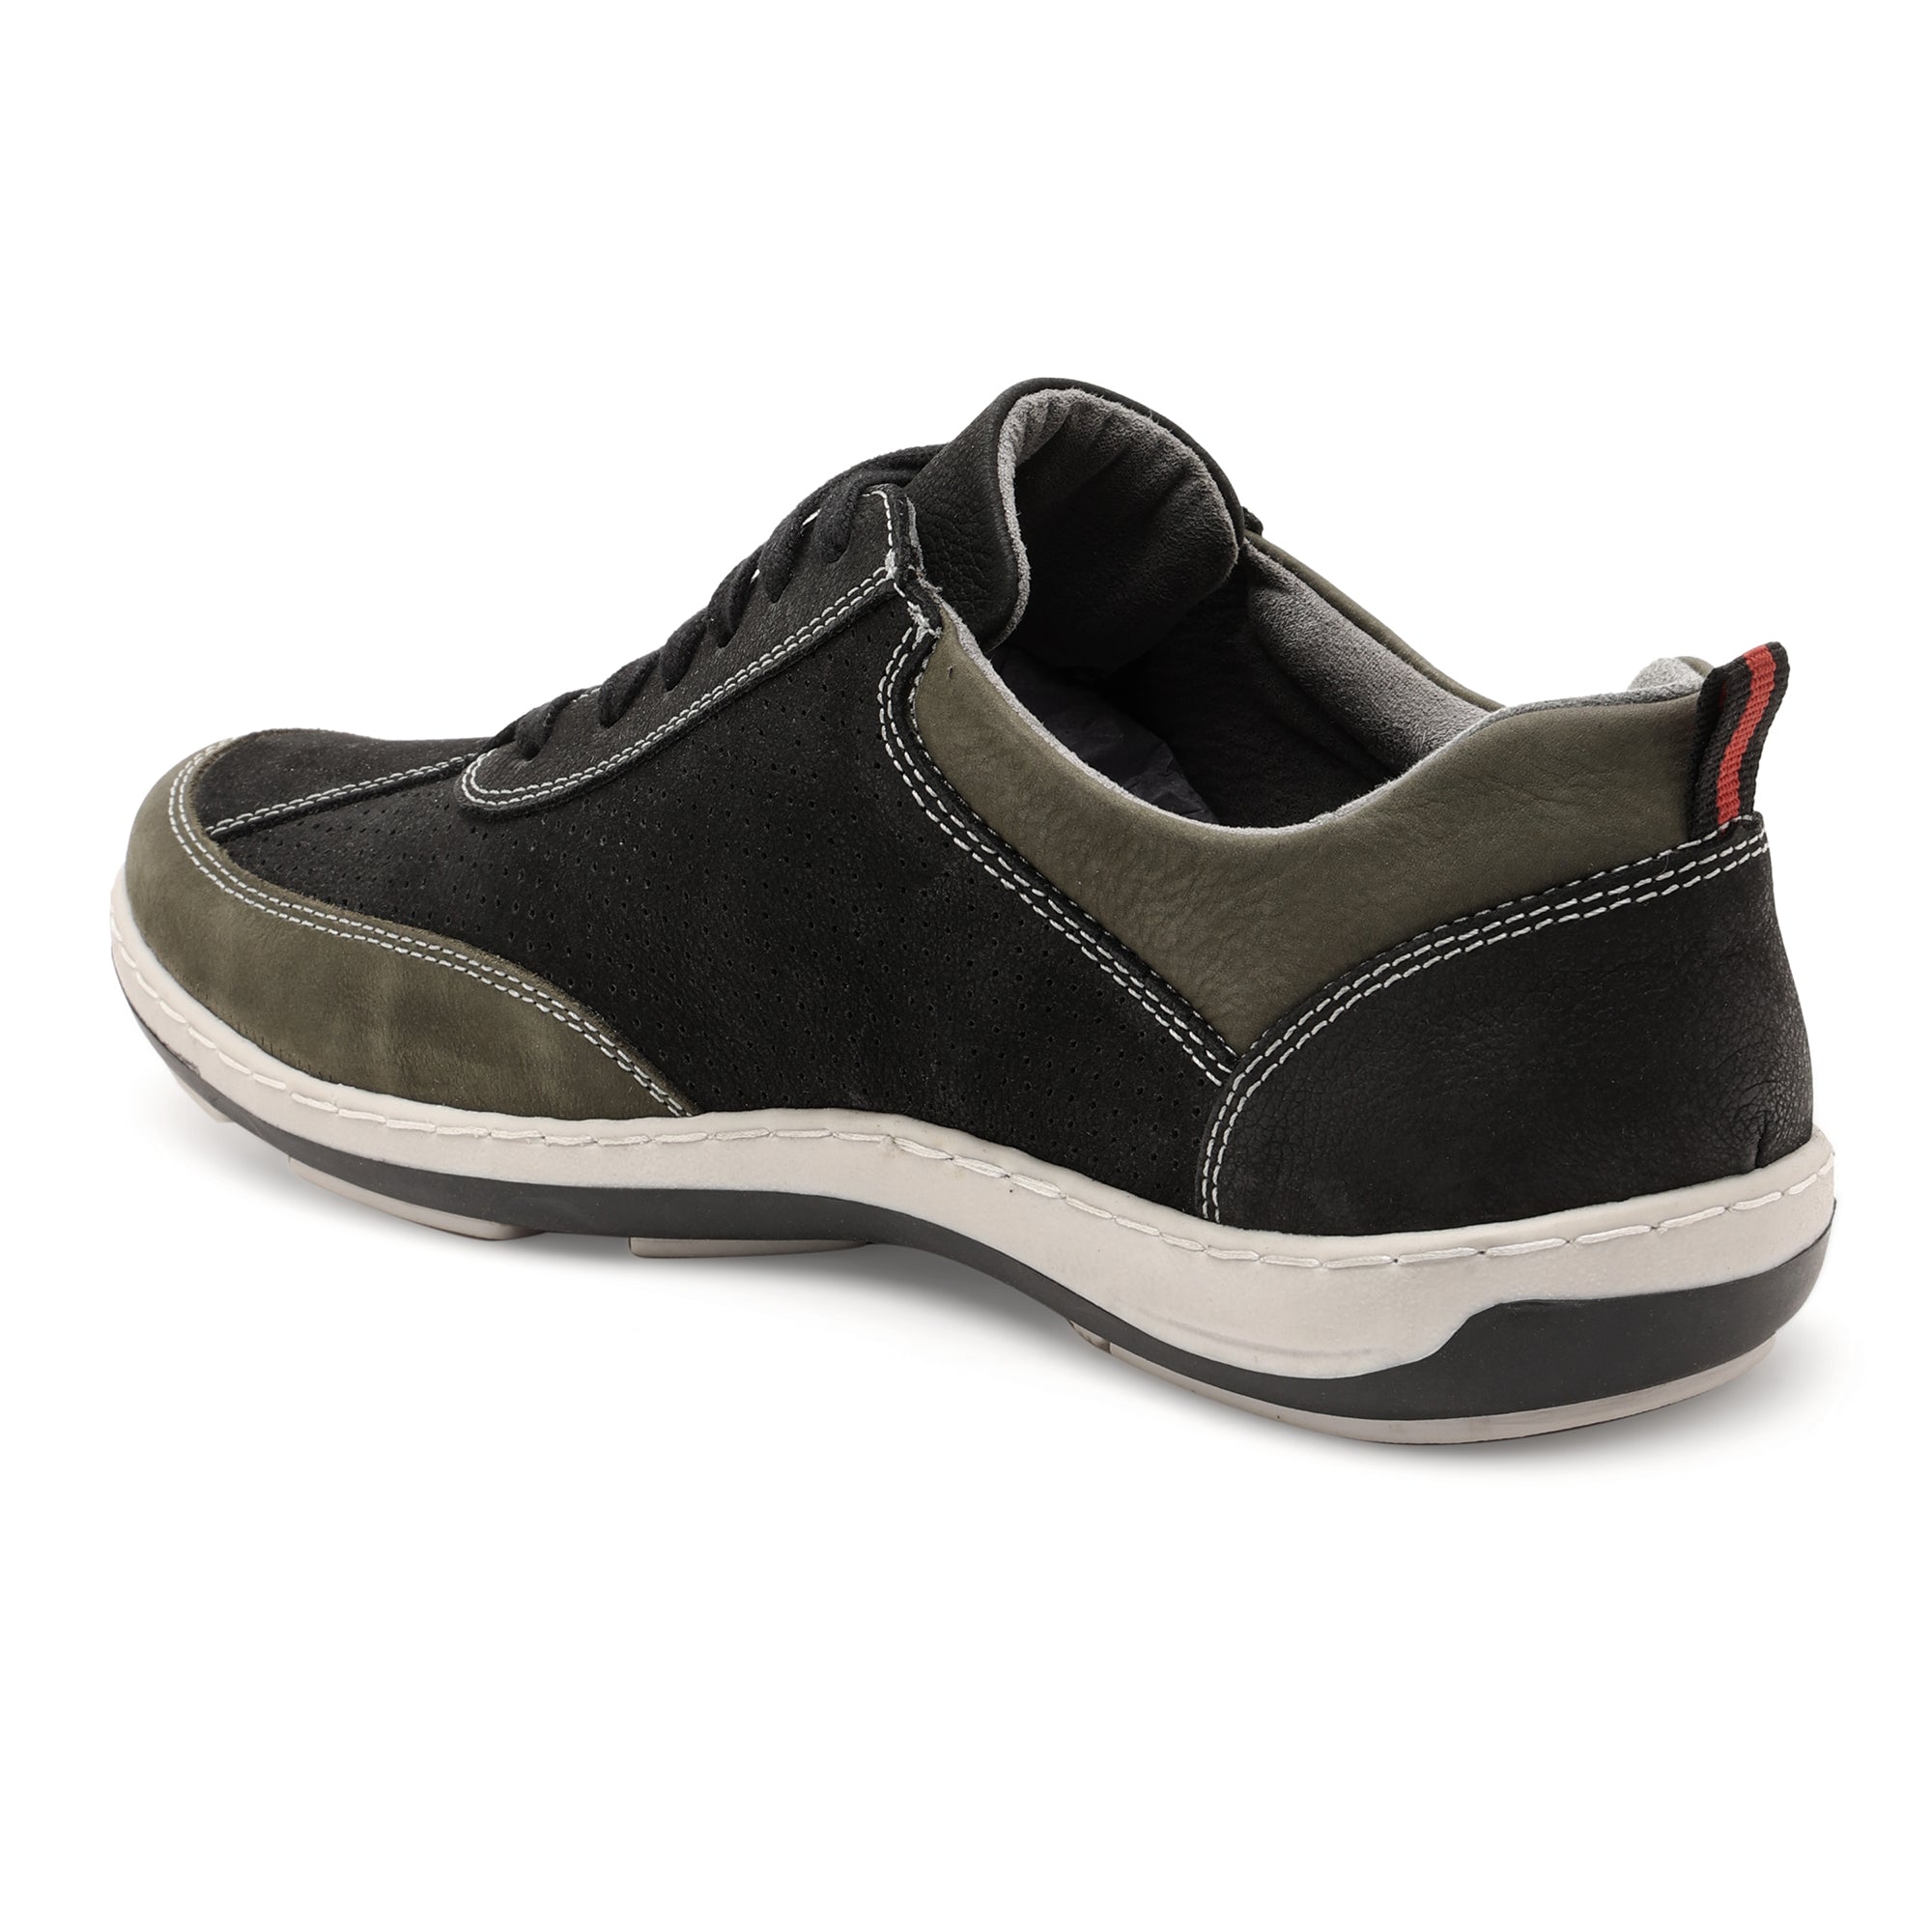 Quentin 08 Men Black and Khaki Casual Shoes